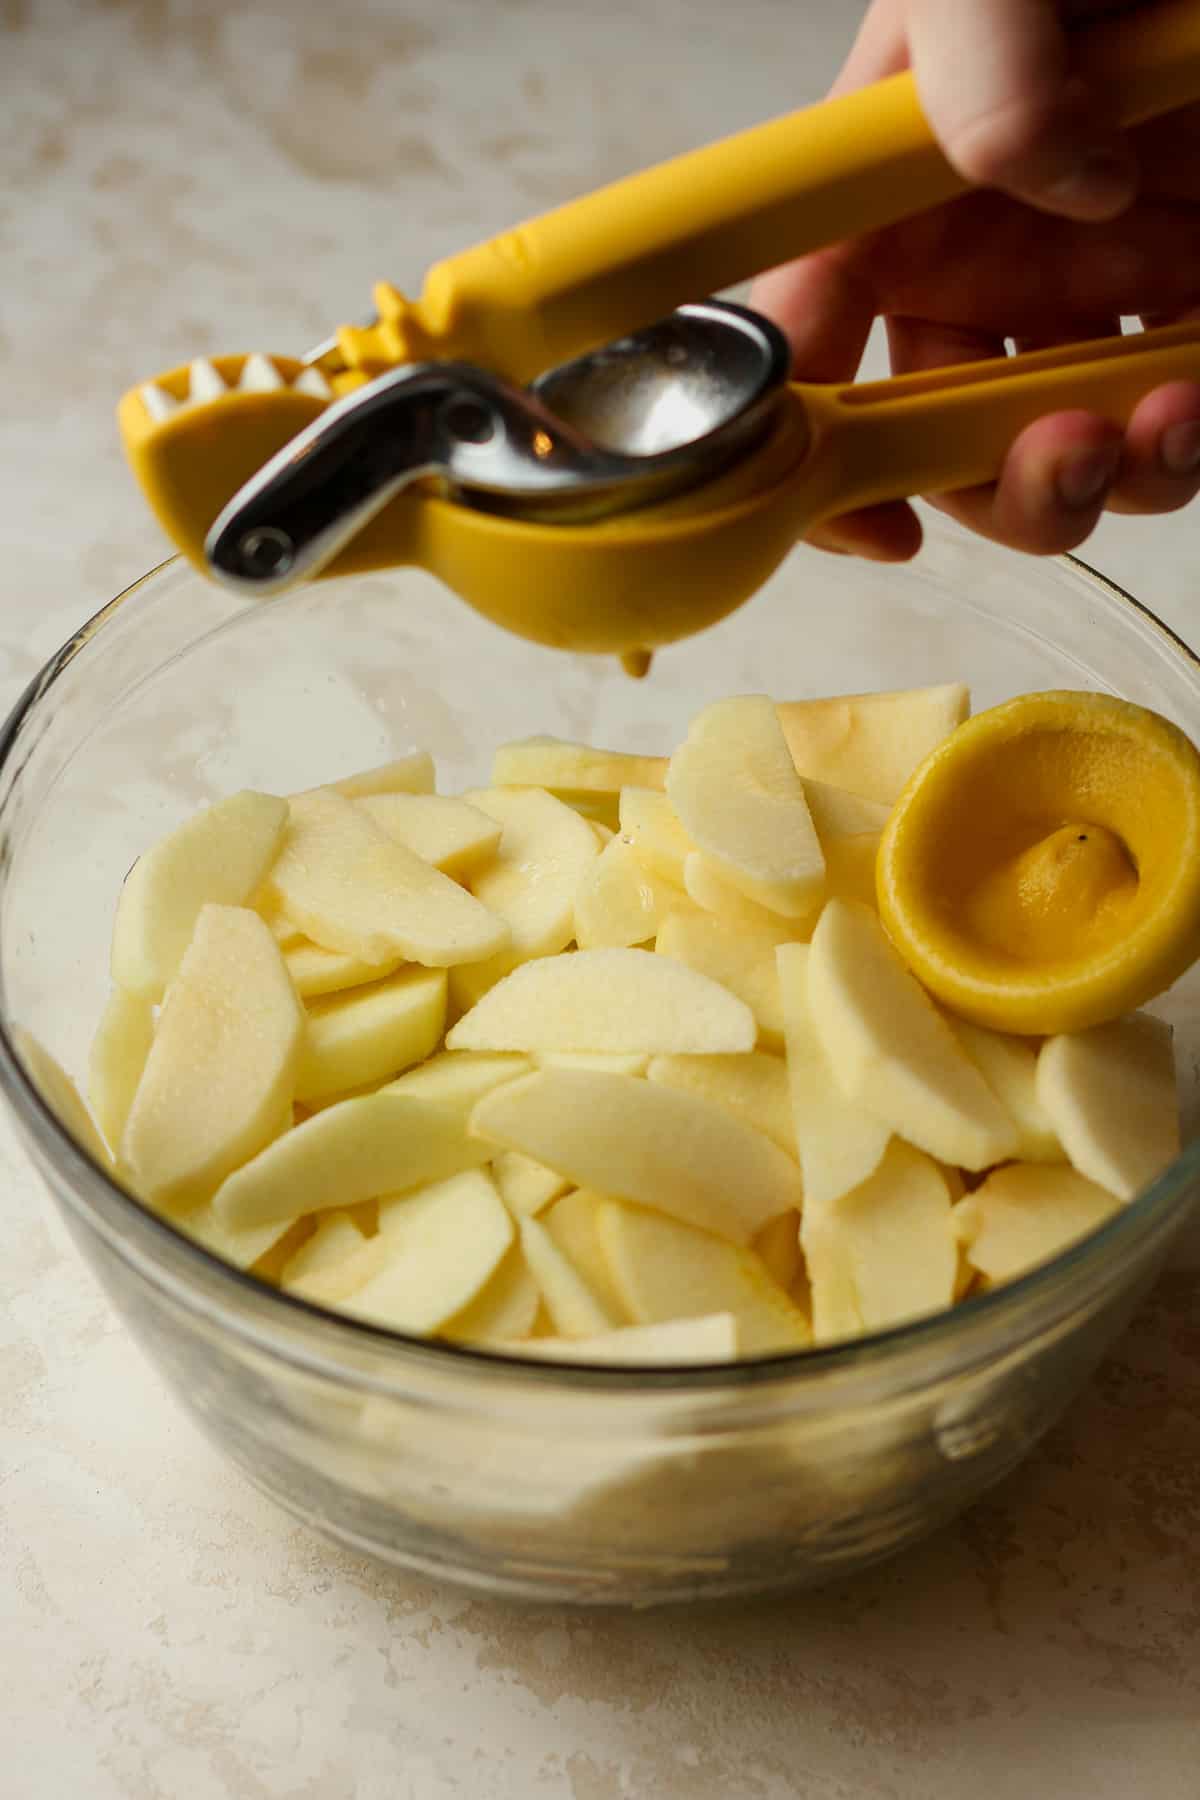 A bowl of the sliced apples with a citrus press squeezing a lemon over top.